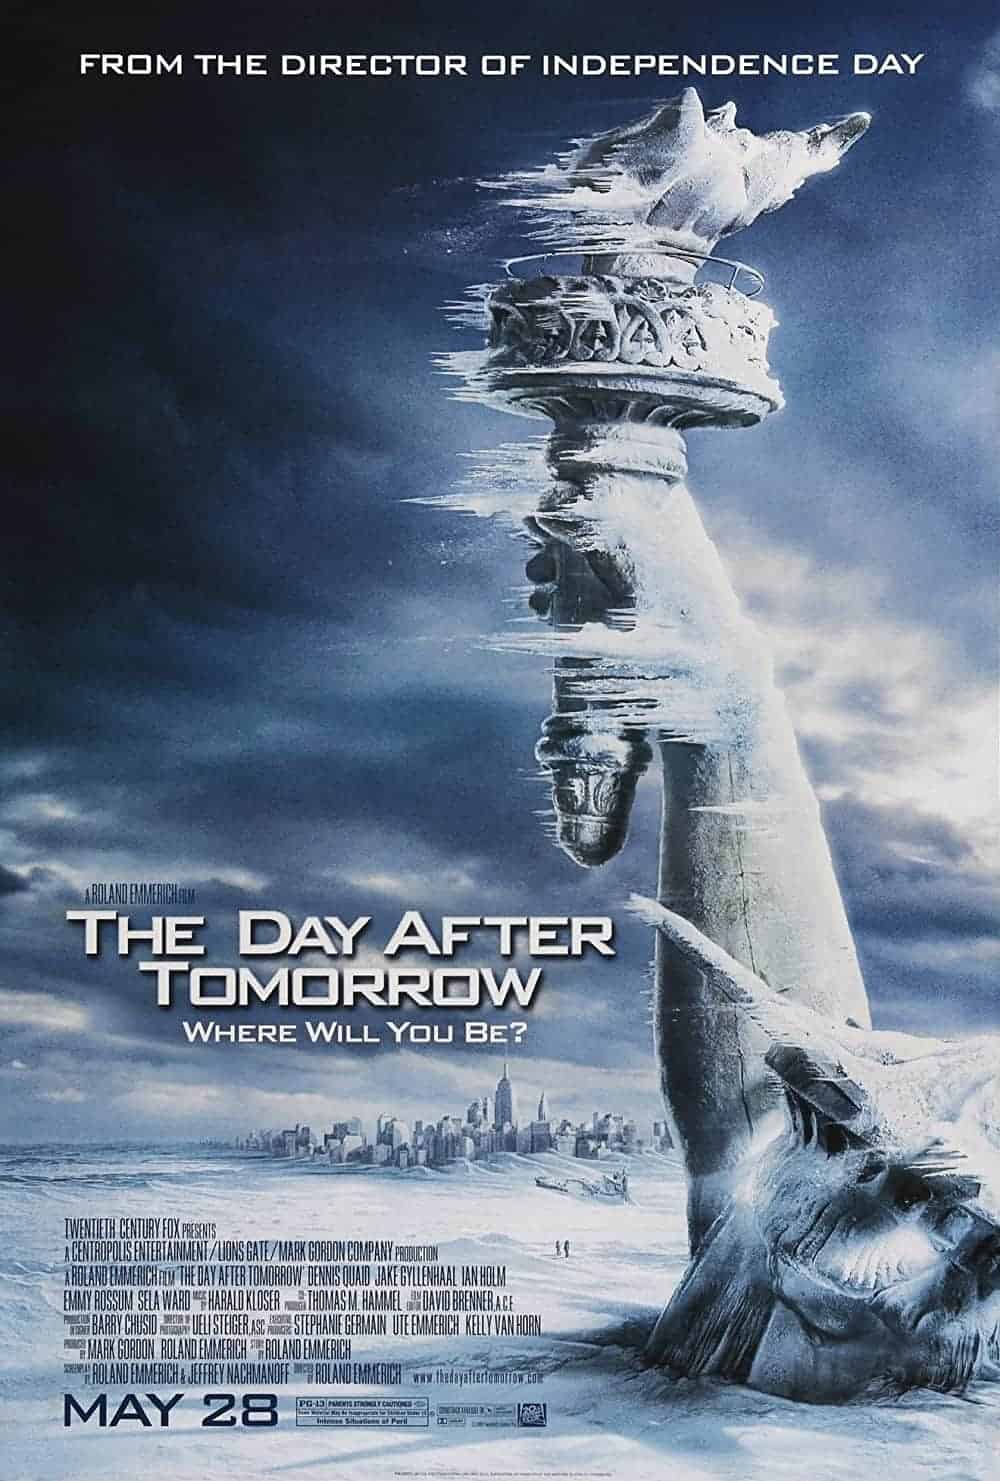 The Day After Tomorrow (2004) Best Tsunami Movies to Add in Your Watchlist